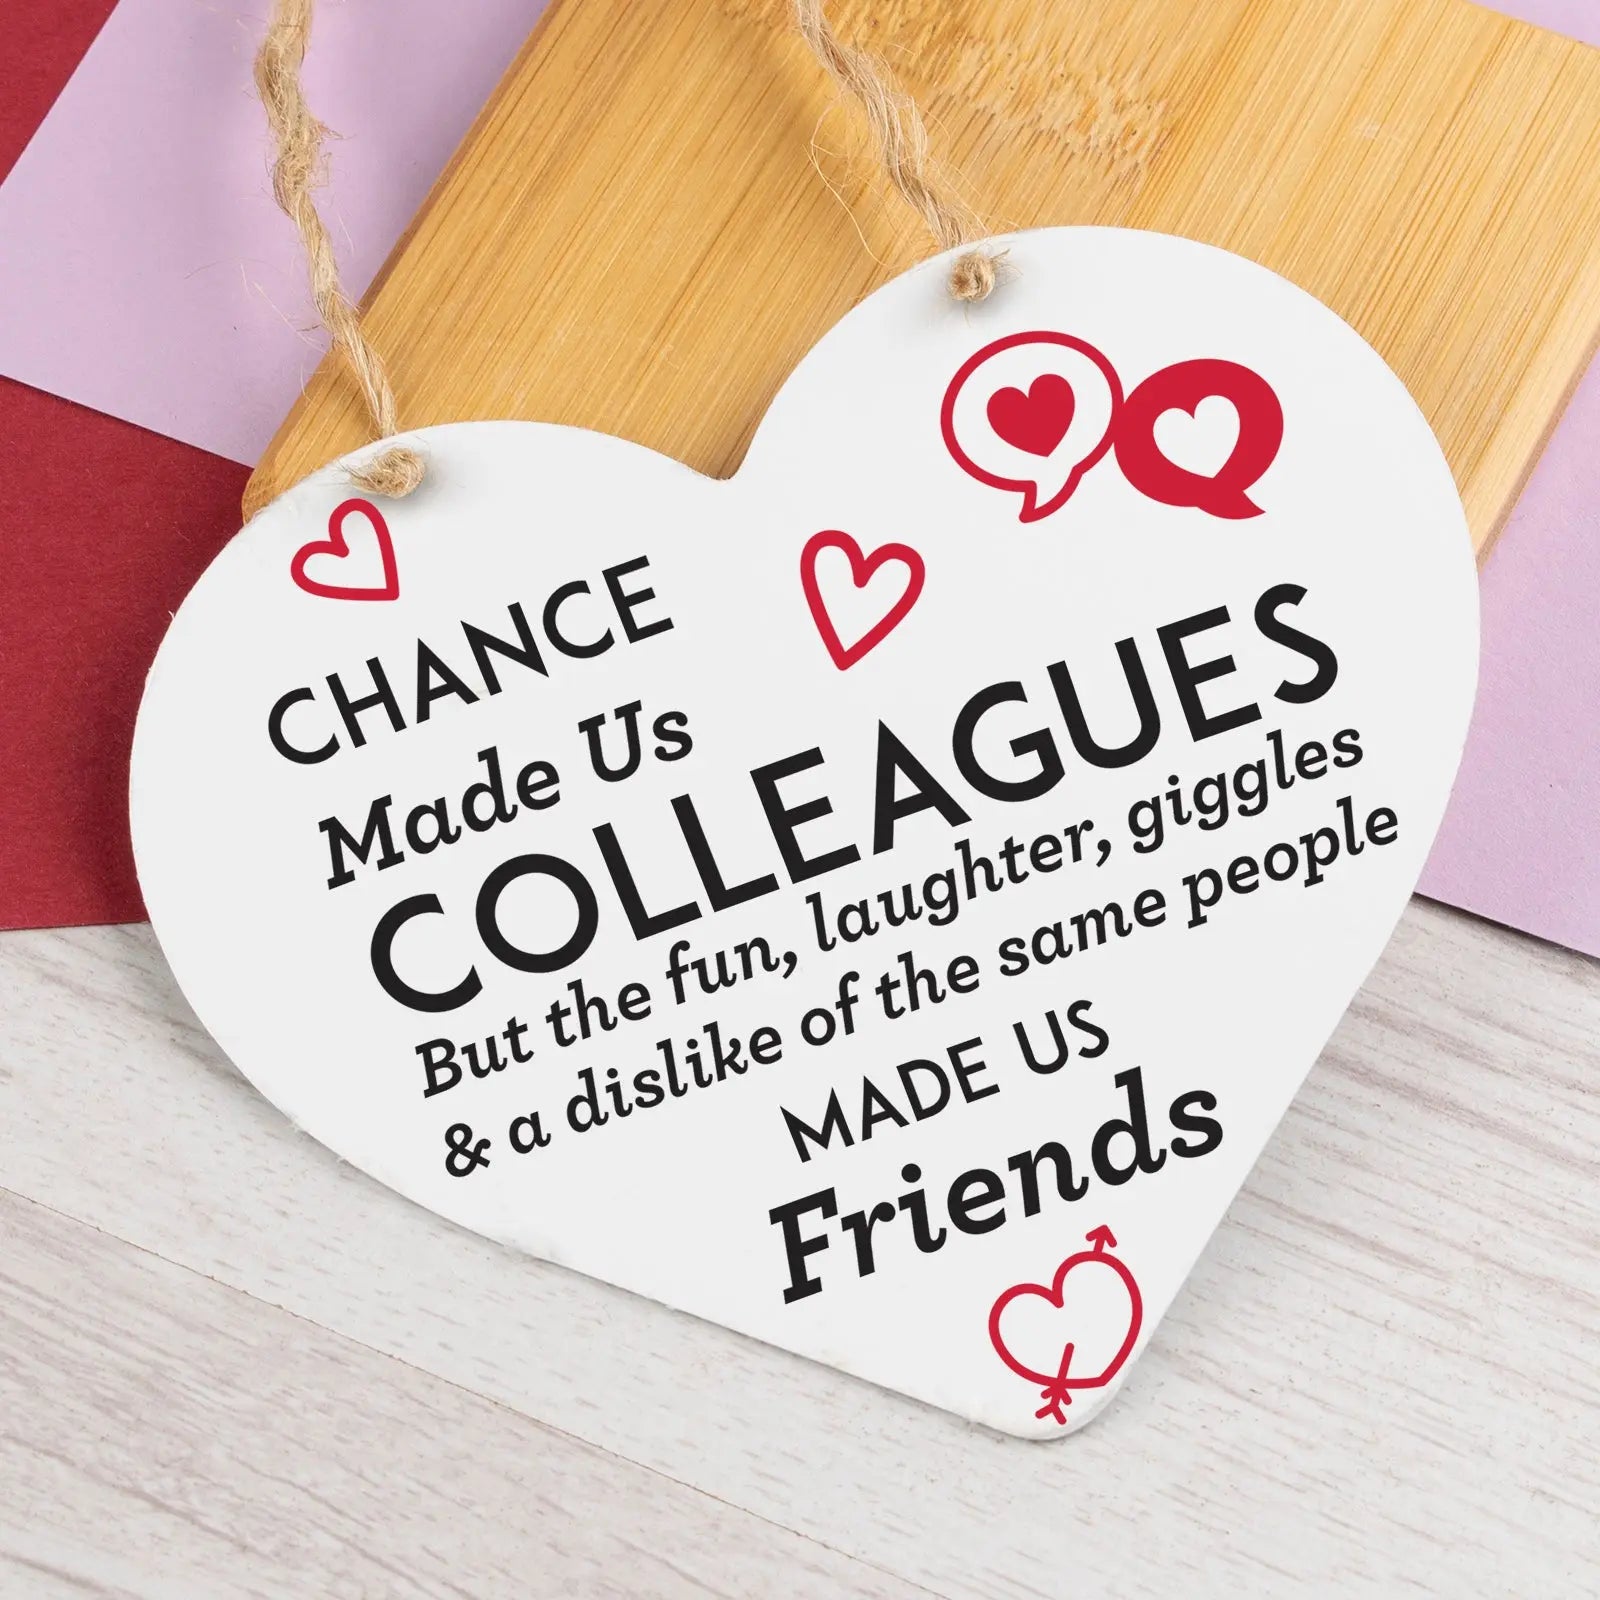 Chance Made Us Colleagues Heart Plaque Hanging Sign Friendship Friends Gift